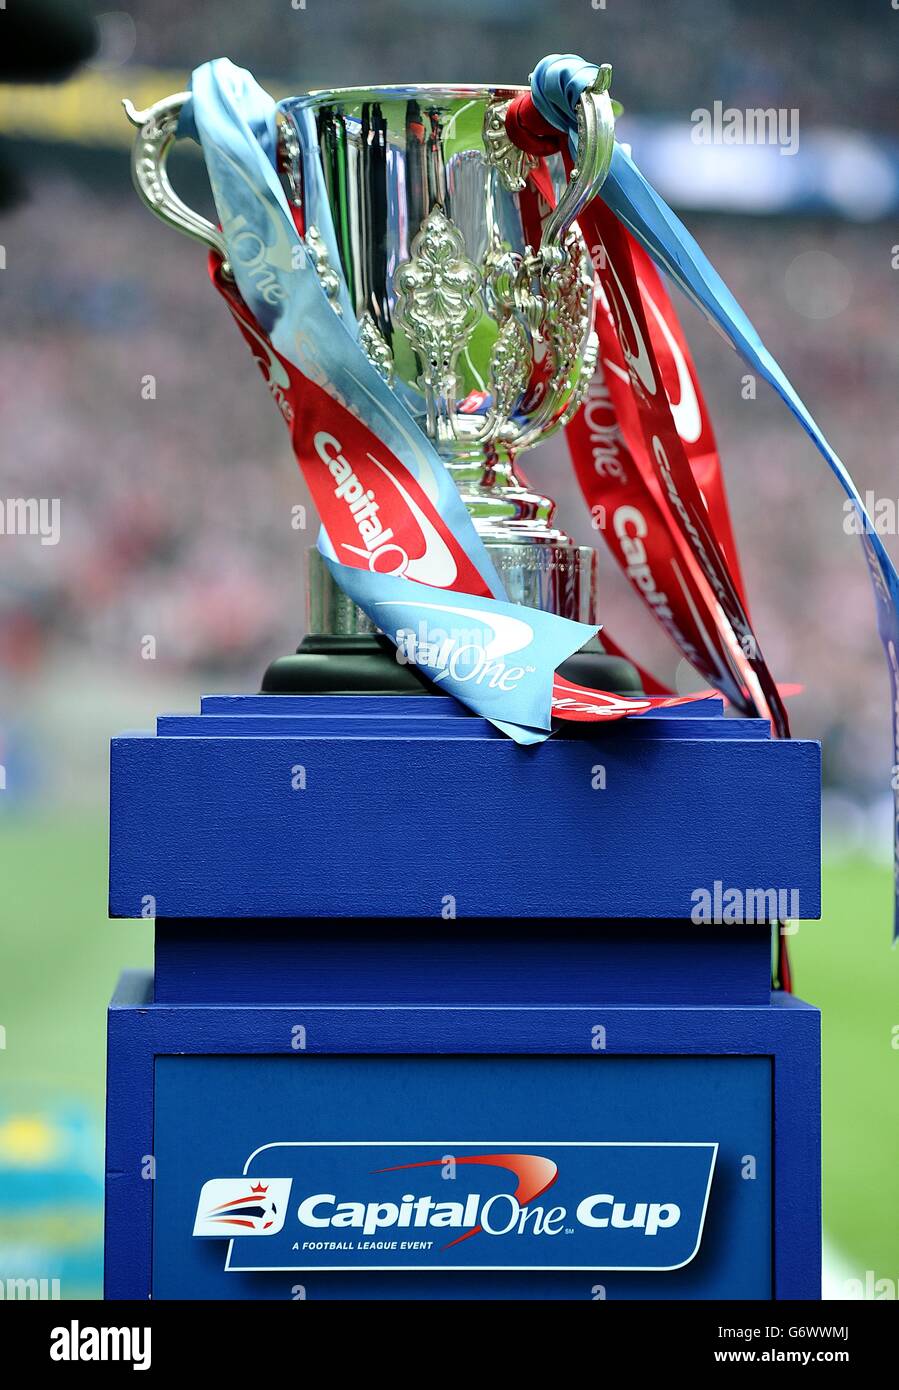 Soccer - Capital One Cup - Final - Manchester City v Sunderland - Wembley Stadium. Capital One Cup trophy on a stand Stock Photo